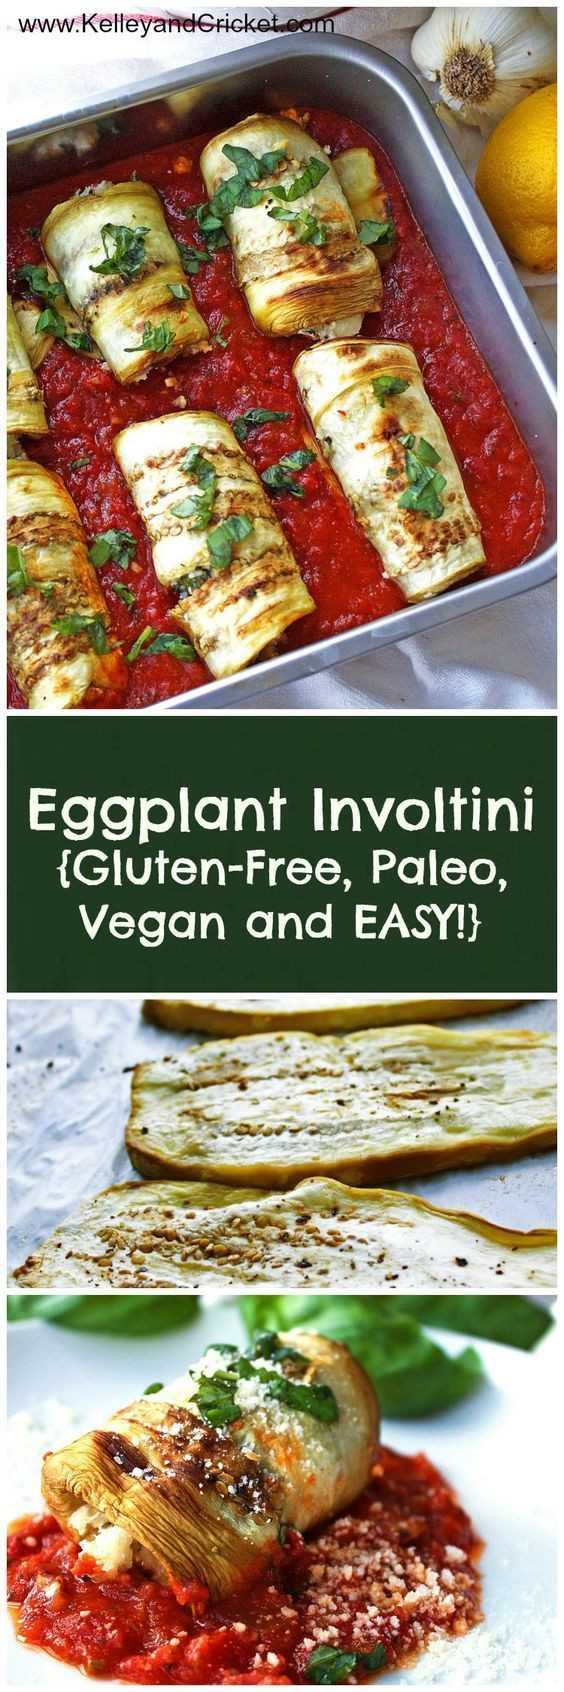 Gluten Free Dairy Free Vegetarian Recipes For Dinner
 17 Best images about vegan gluten nut free or I ll make it